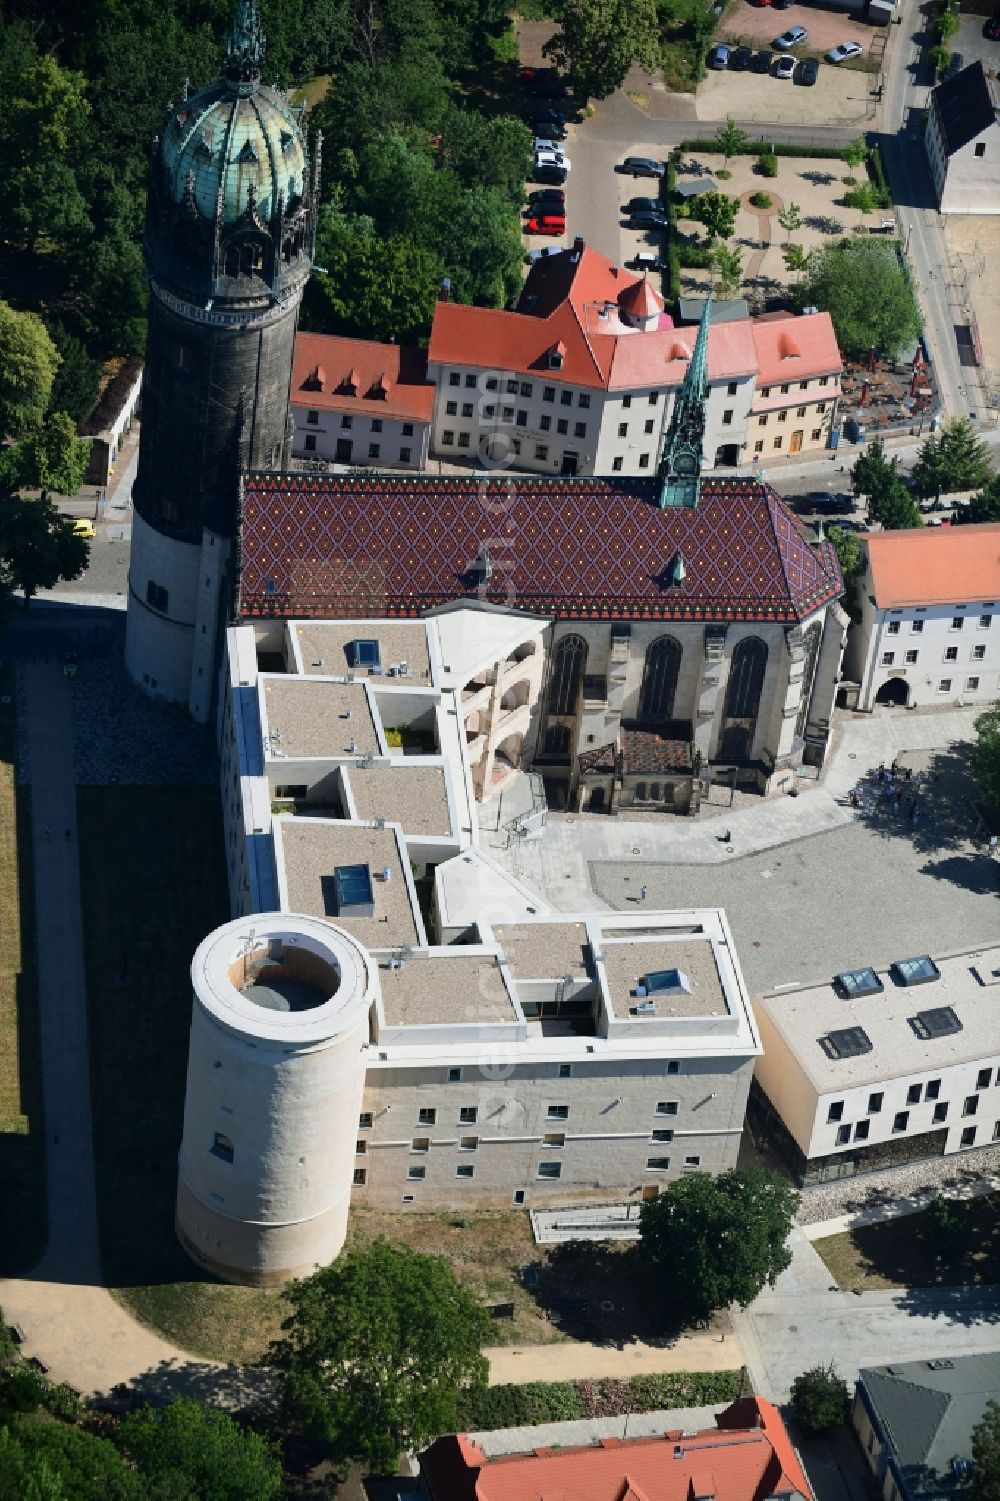 Lutherstadt Wittenberg from above - Castle church of Wittenberg. The castle with its 88 m high Gothic tower at the west end of the town is a UNESCO World Heritage Site. It gained fame as the Wittenberg Augustinian monk and theology professor Martin Luther spread his disputation